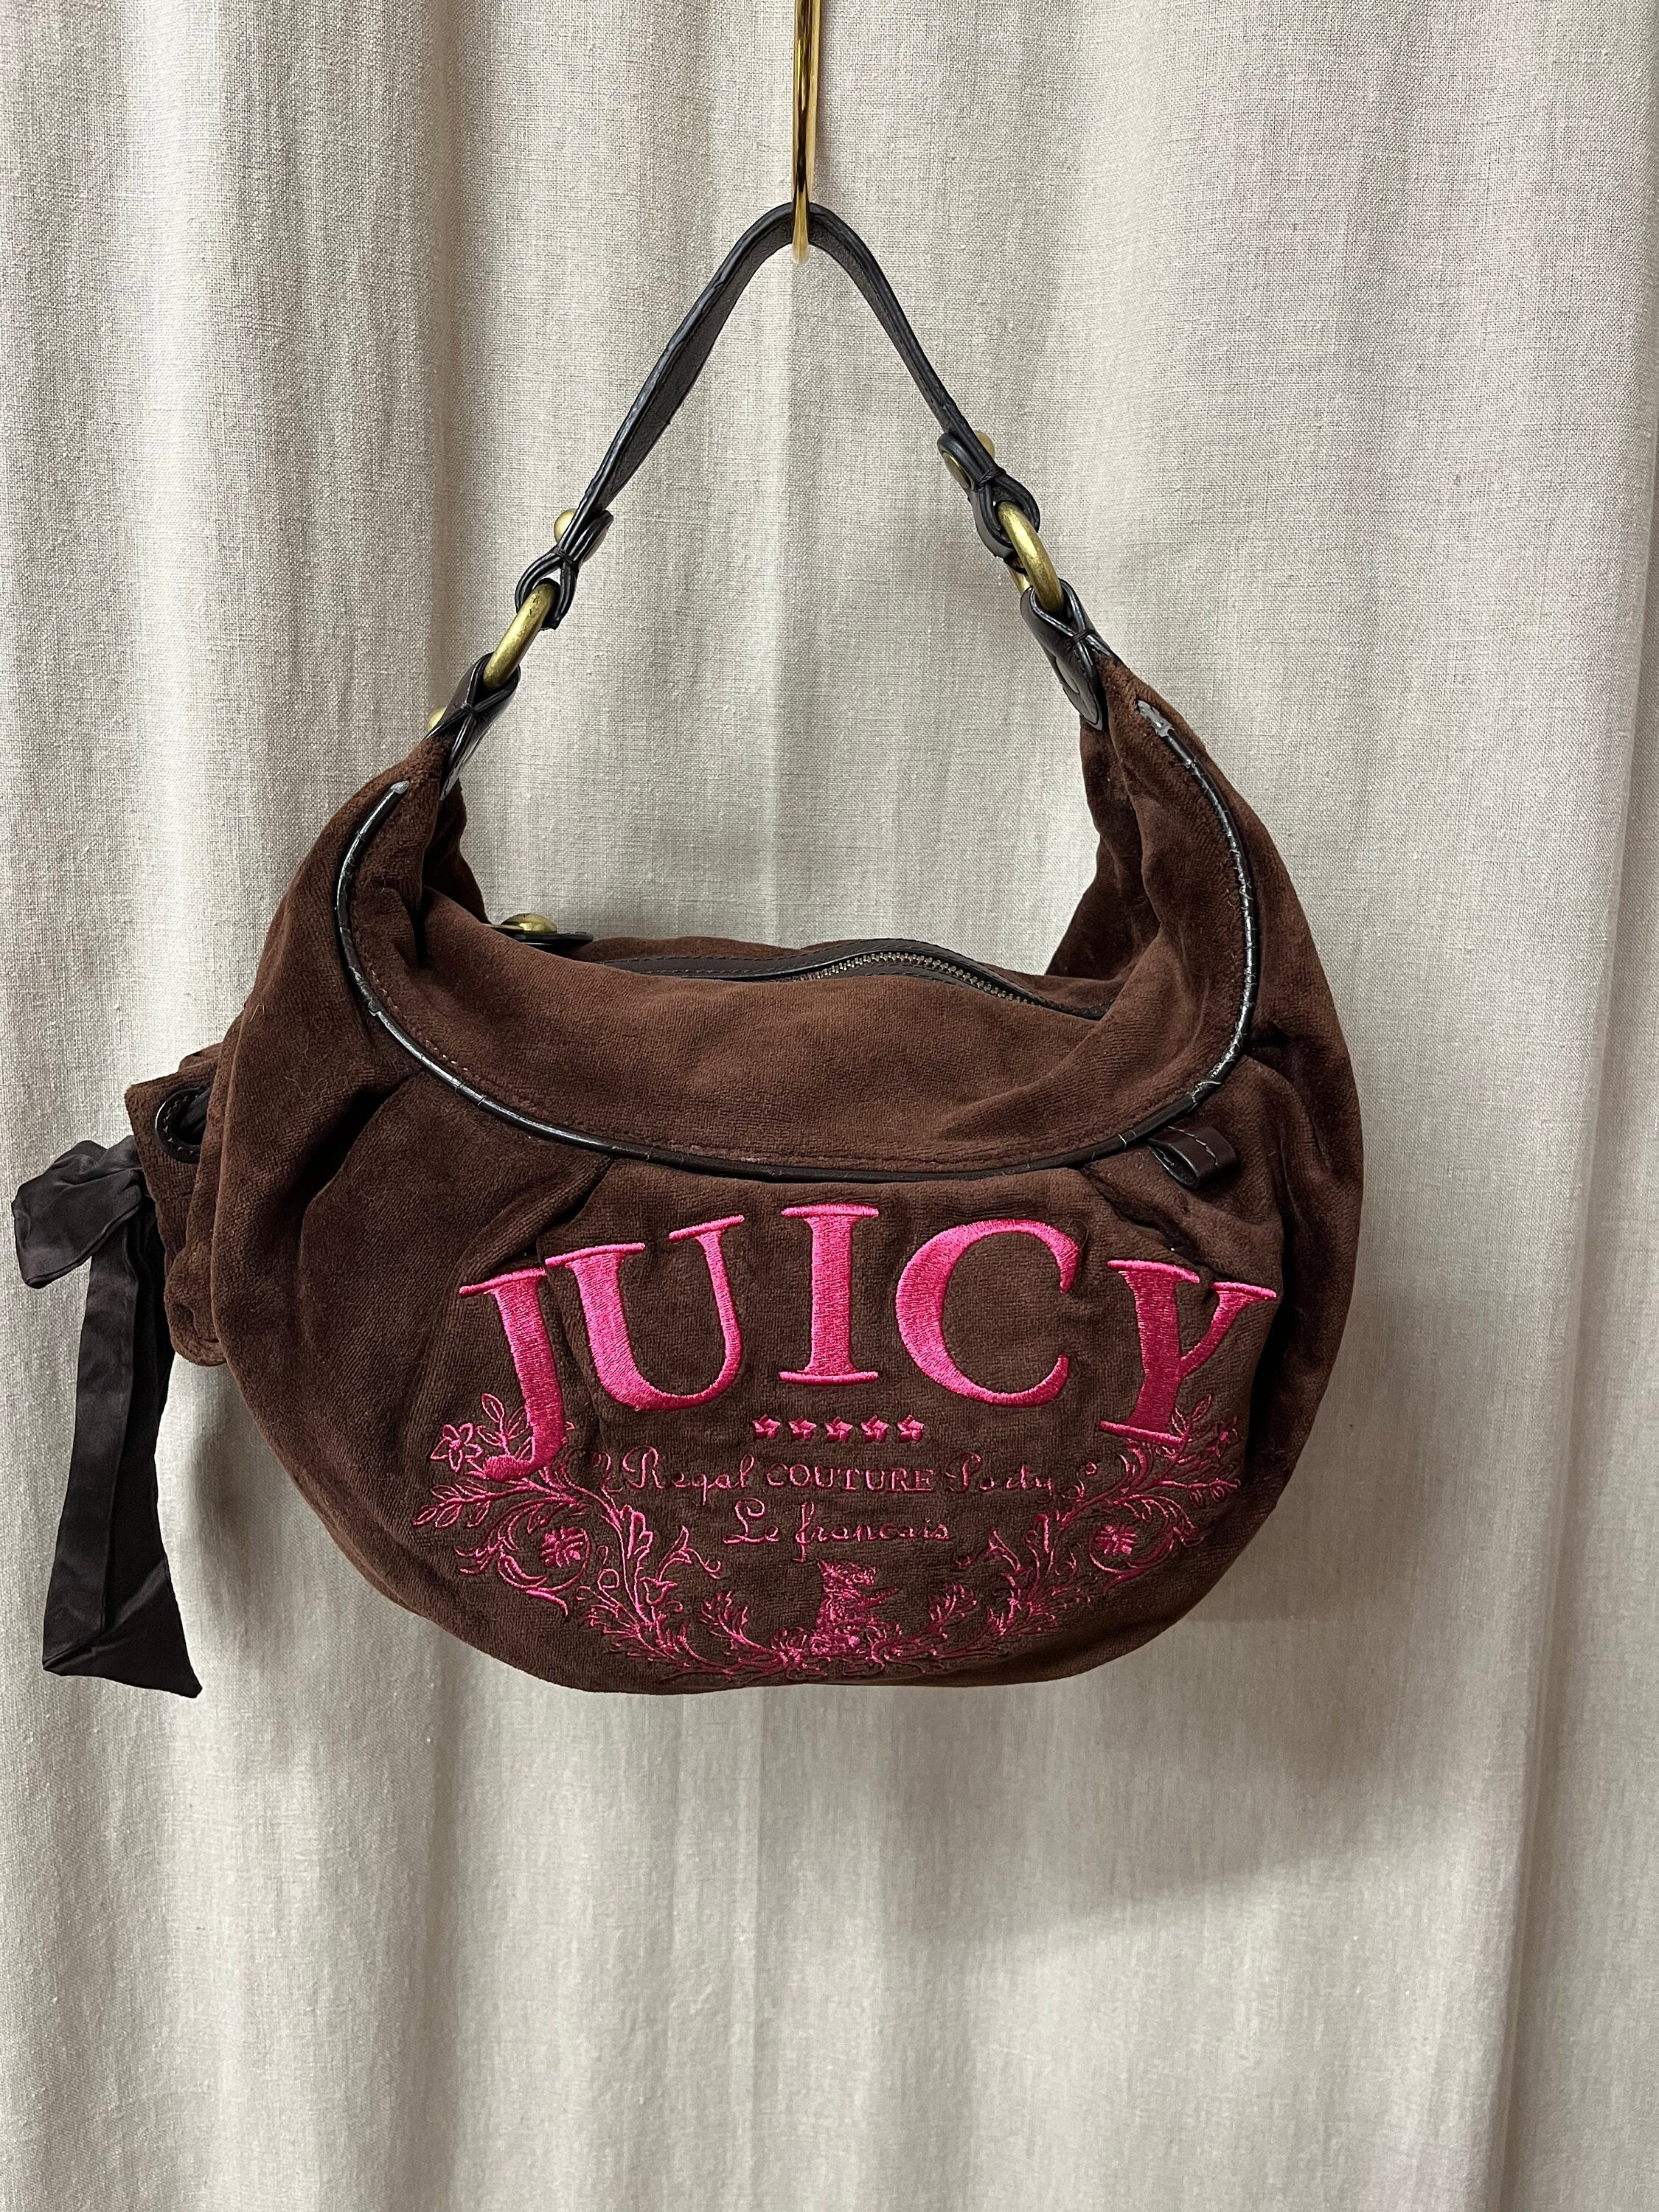 Vintage Y2K Juicy Couture Glazed Leather Black Gold Purse Bag Black 2000s  Crystal Charms Puffy Heart Charms Chain Strap Hobo Baguette Bag -   Canada